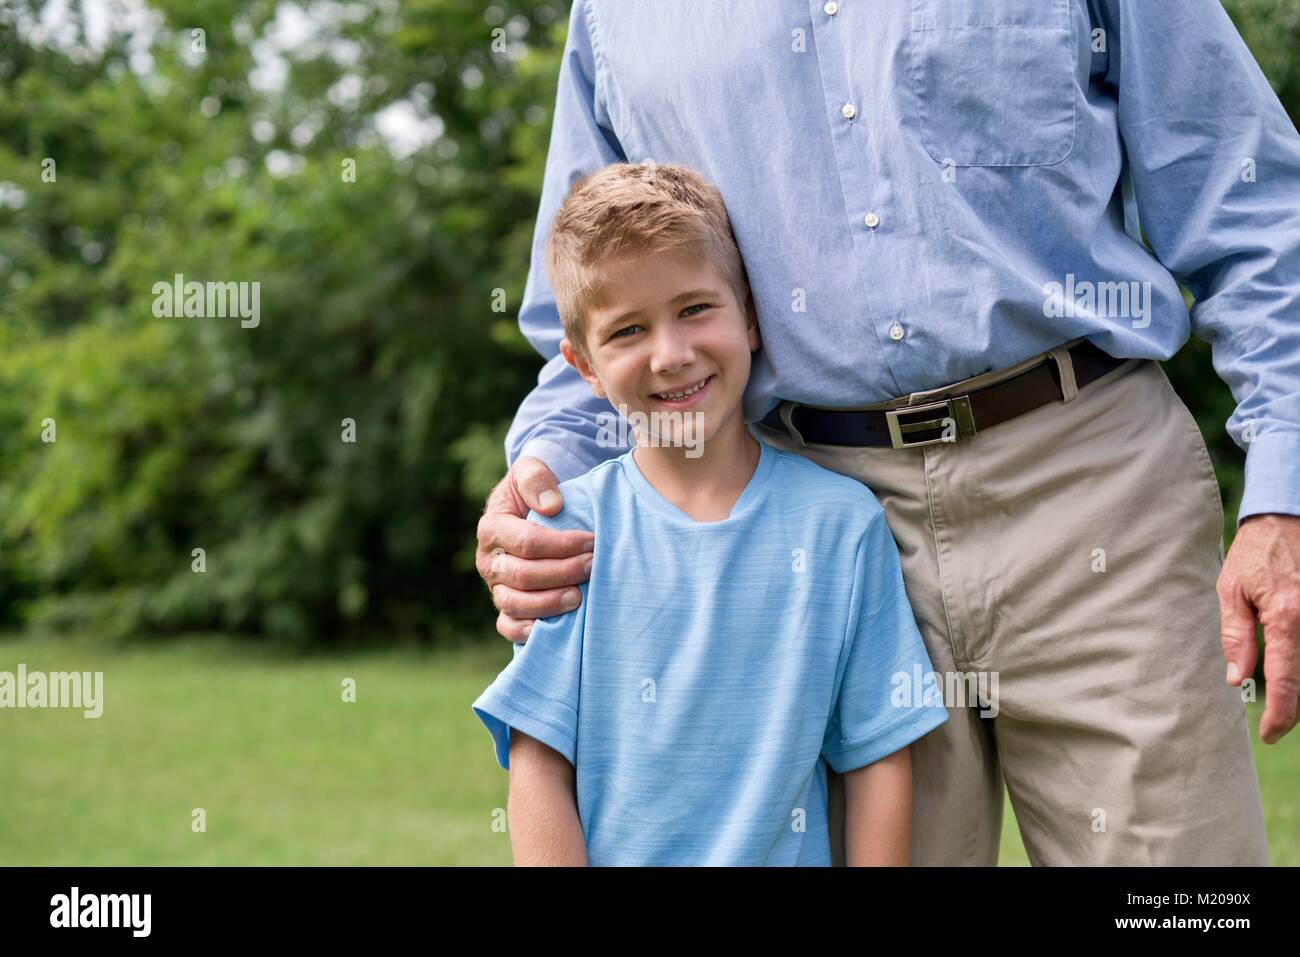 Man with arm around young boy, smiling. Stock Photo